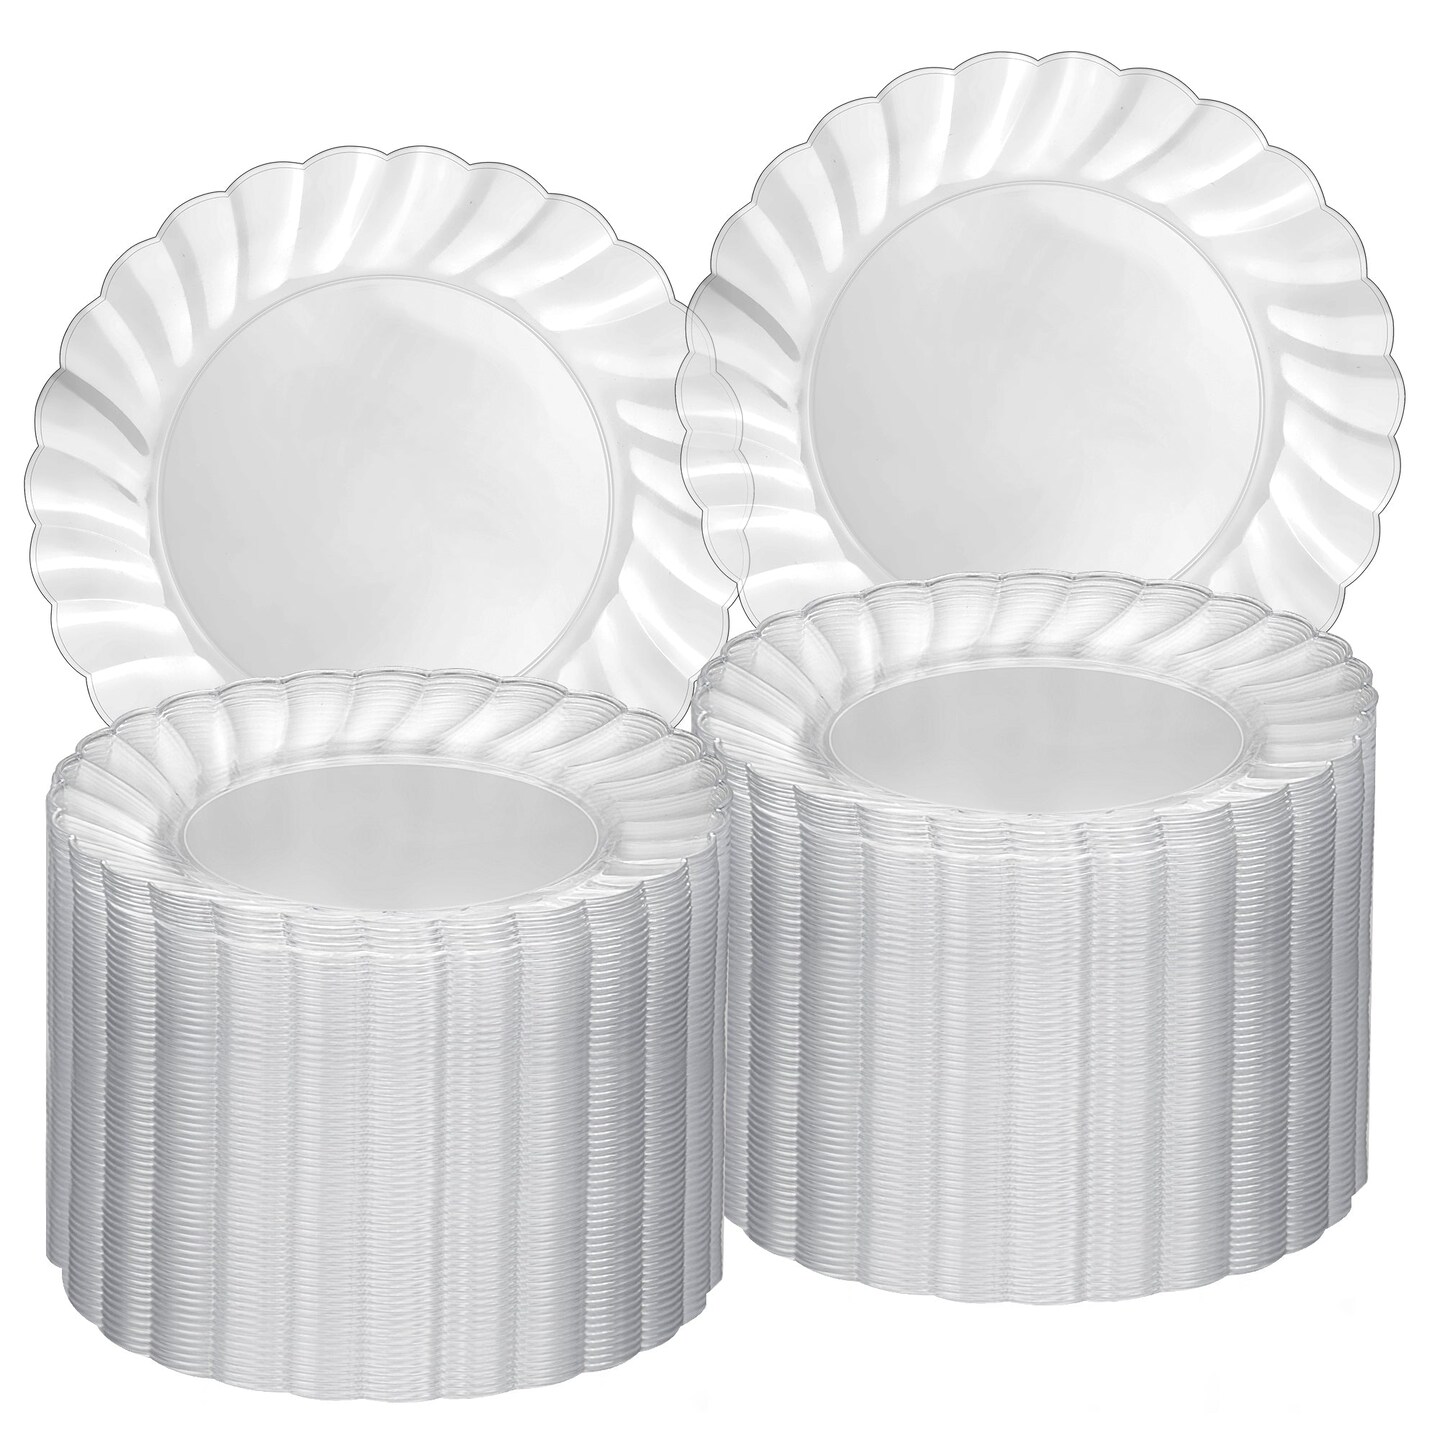 100 Pack 6 Inch Clear Disposable Plastic Plates - Dessert, Salad